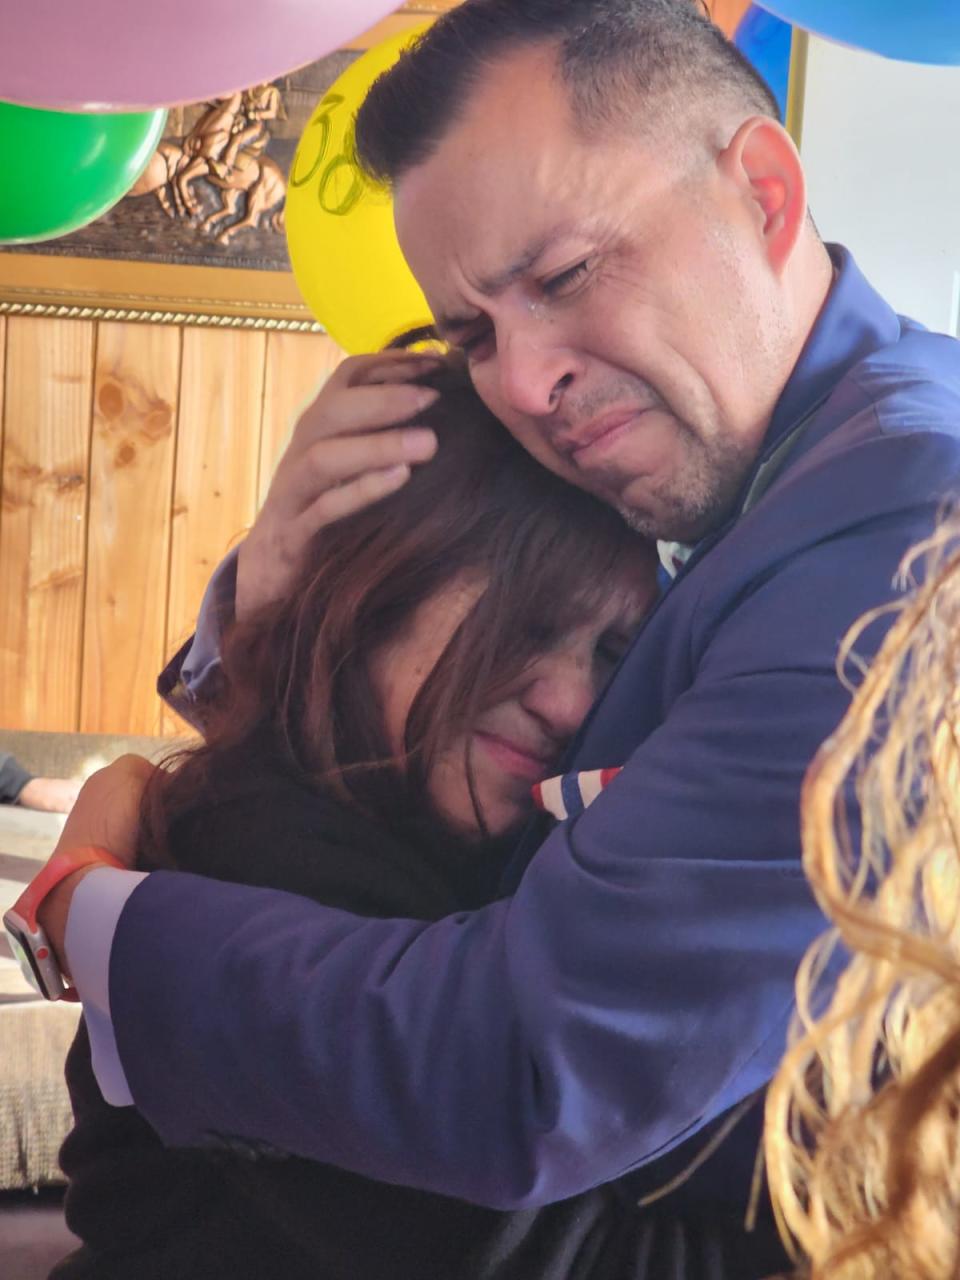 Jimmy Lippert Thyden cries as he holds his mamá, María Angélica González, shortly after their reunion on Aug. 17, 2023, in Valdivia, Chile.